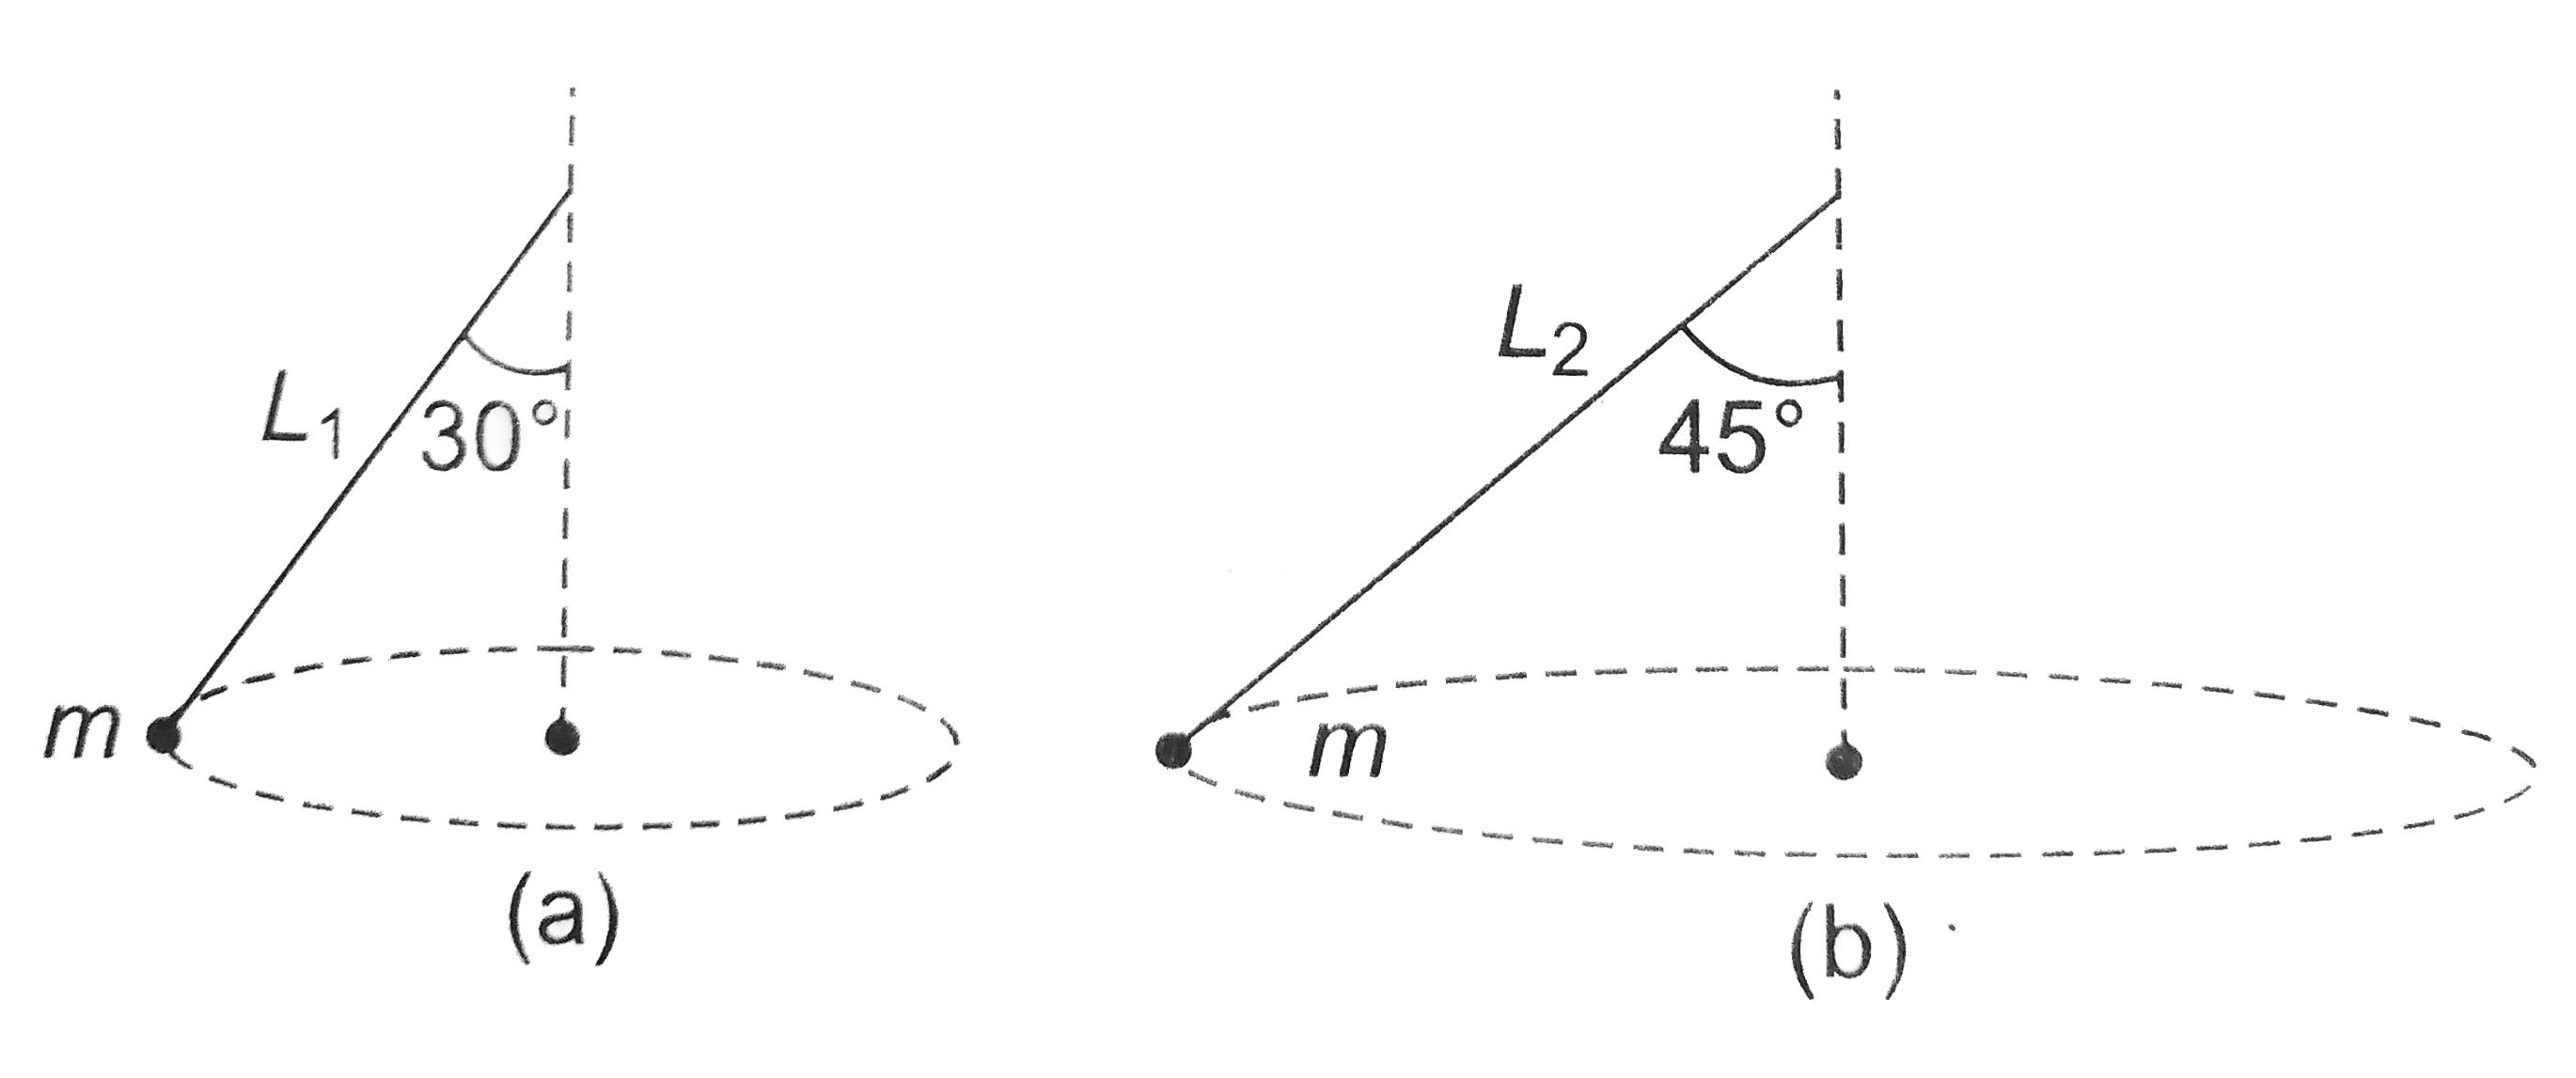 Two partical tied to different strings are whirled in a horizontal circle as shown in figure. The ratio of lengths of the string so that they complete their circular path with equal time period is: